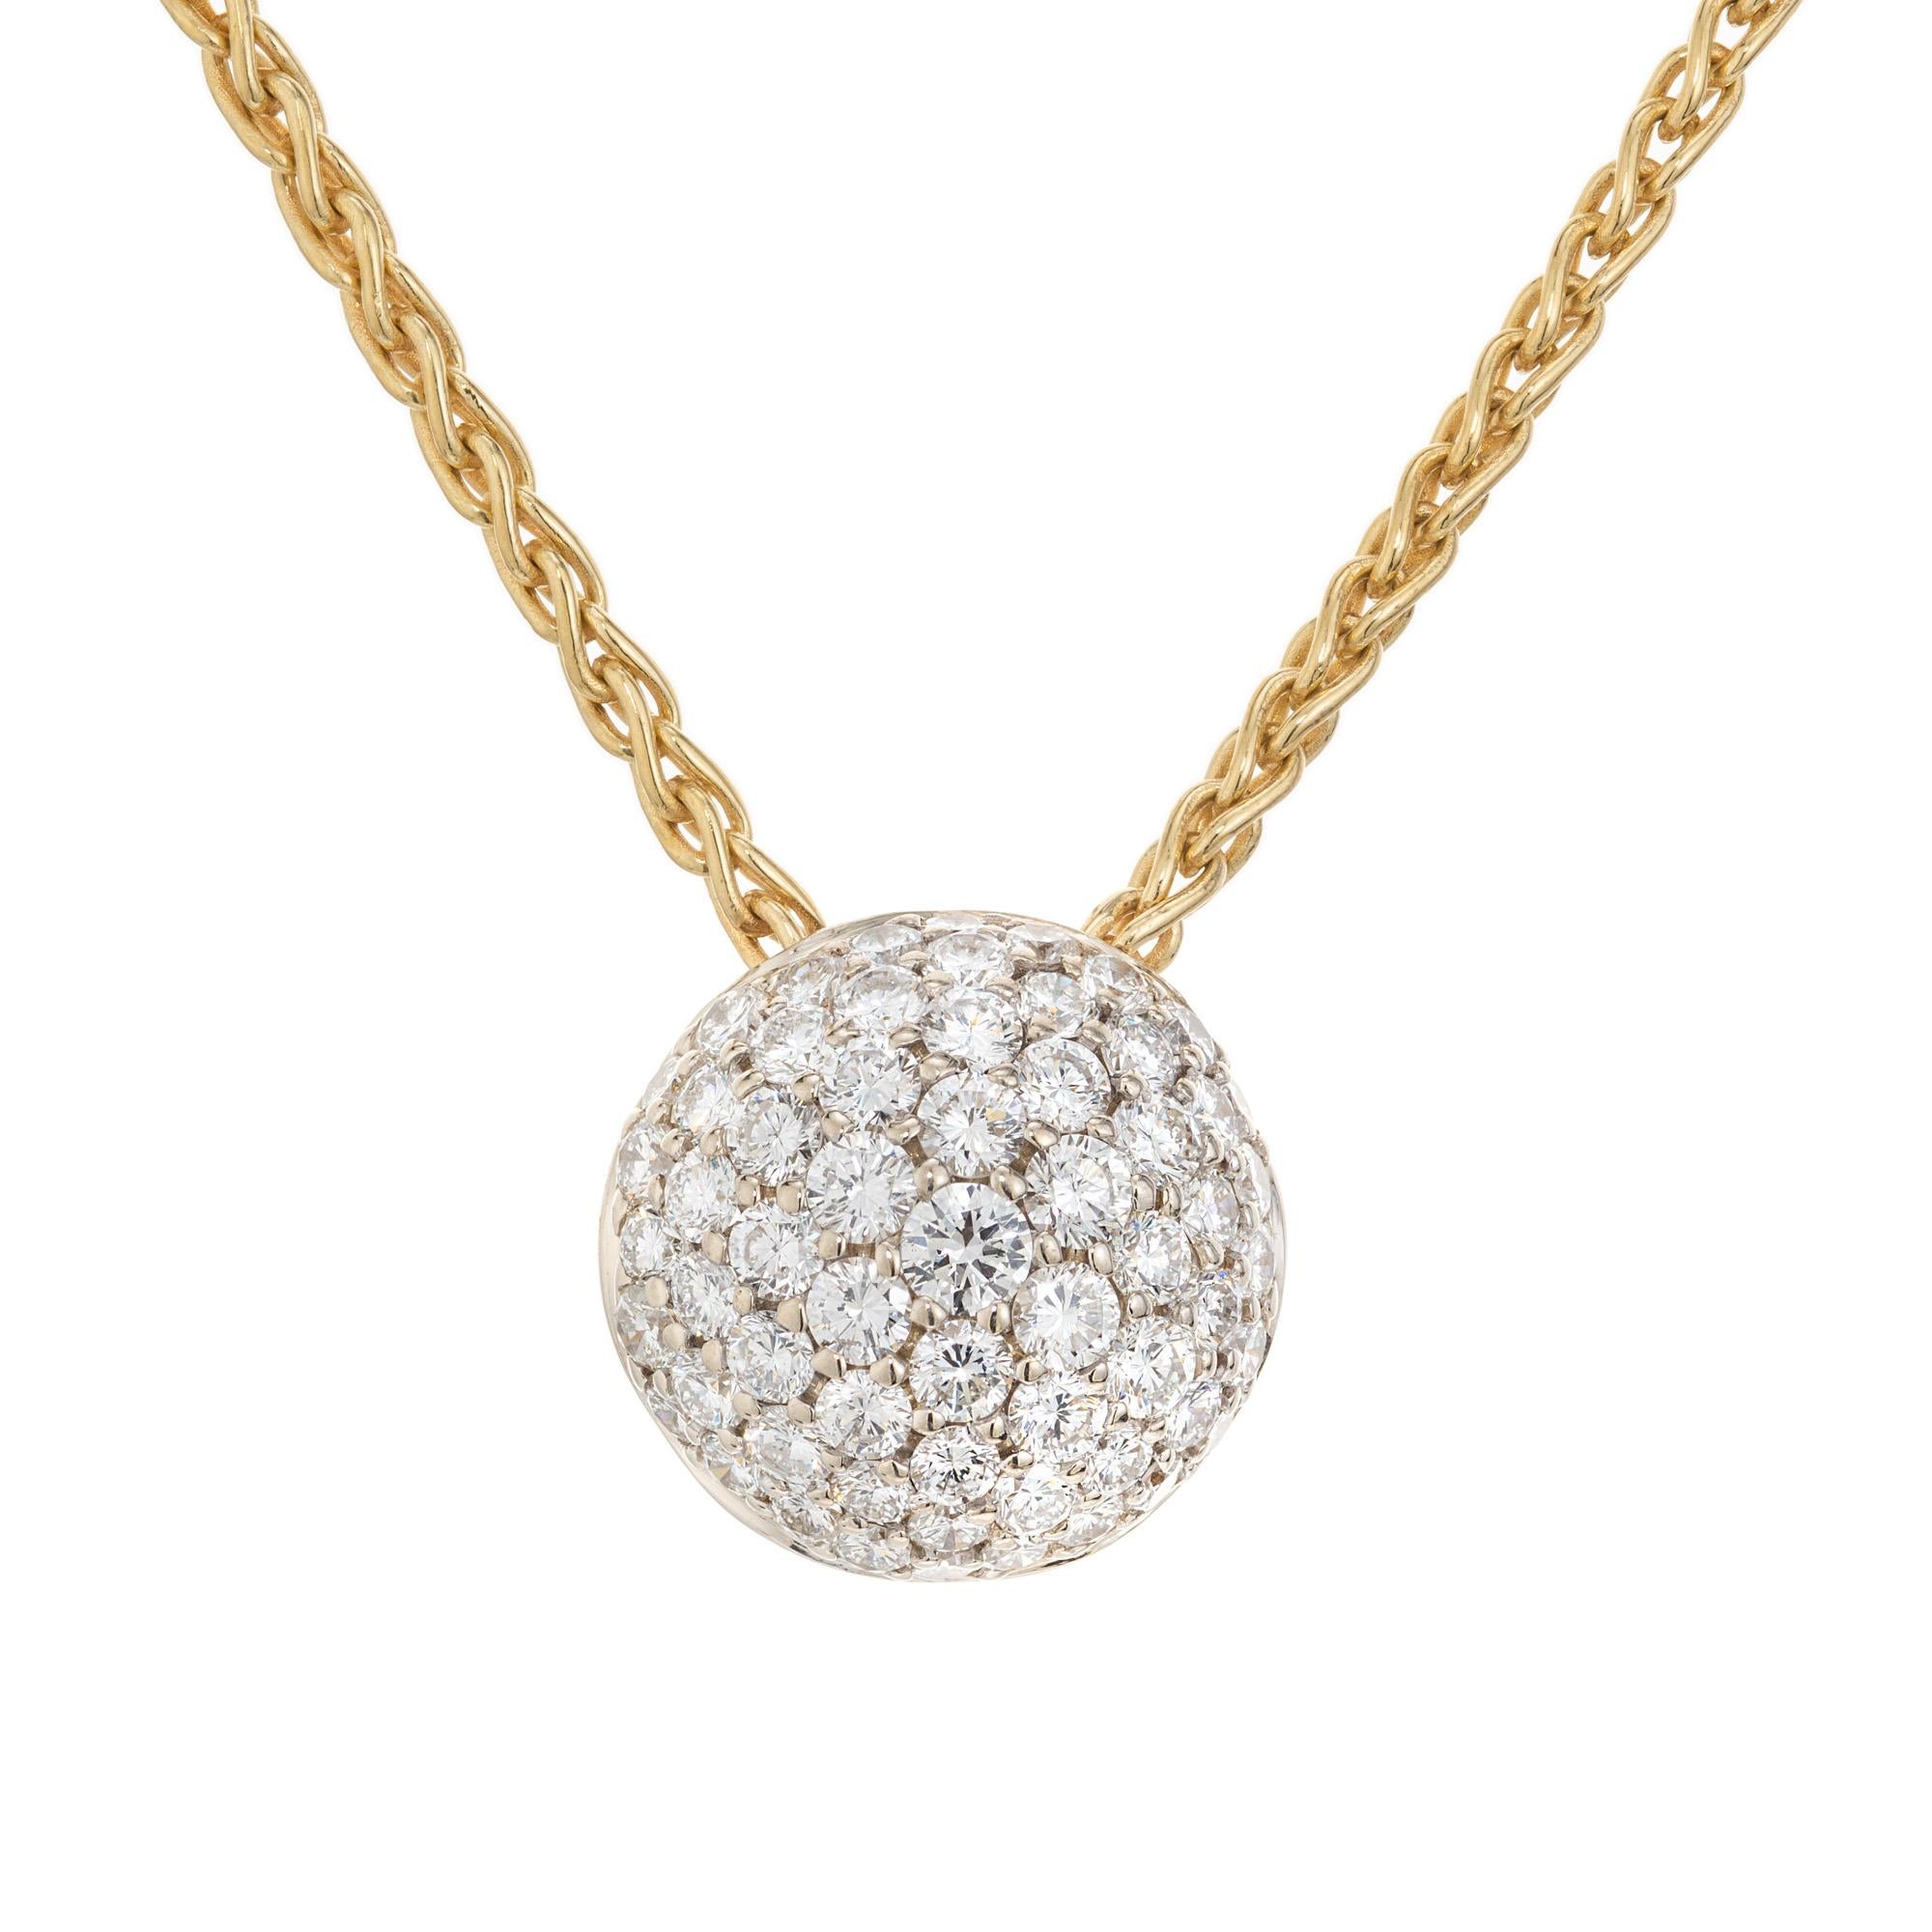 Diamond pendant necklace. 61 pave set round brilliant cut diamonds in a 14k white gold domed cluster formation. The back of the pendant is 18k yellow gold 16 inch  link chain.  

61 round brilliant cut diamonds, HI VS SI approx. .93cts
18k yellow